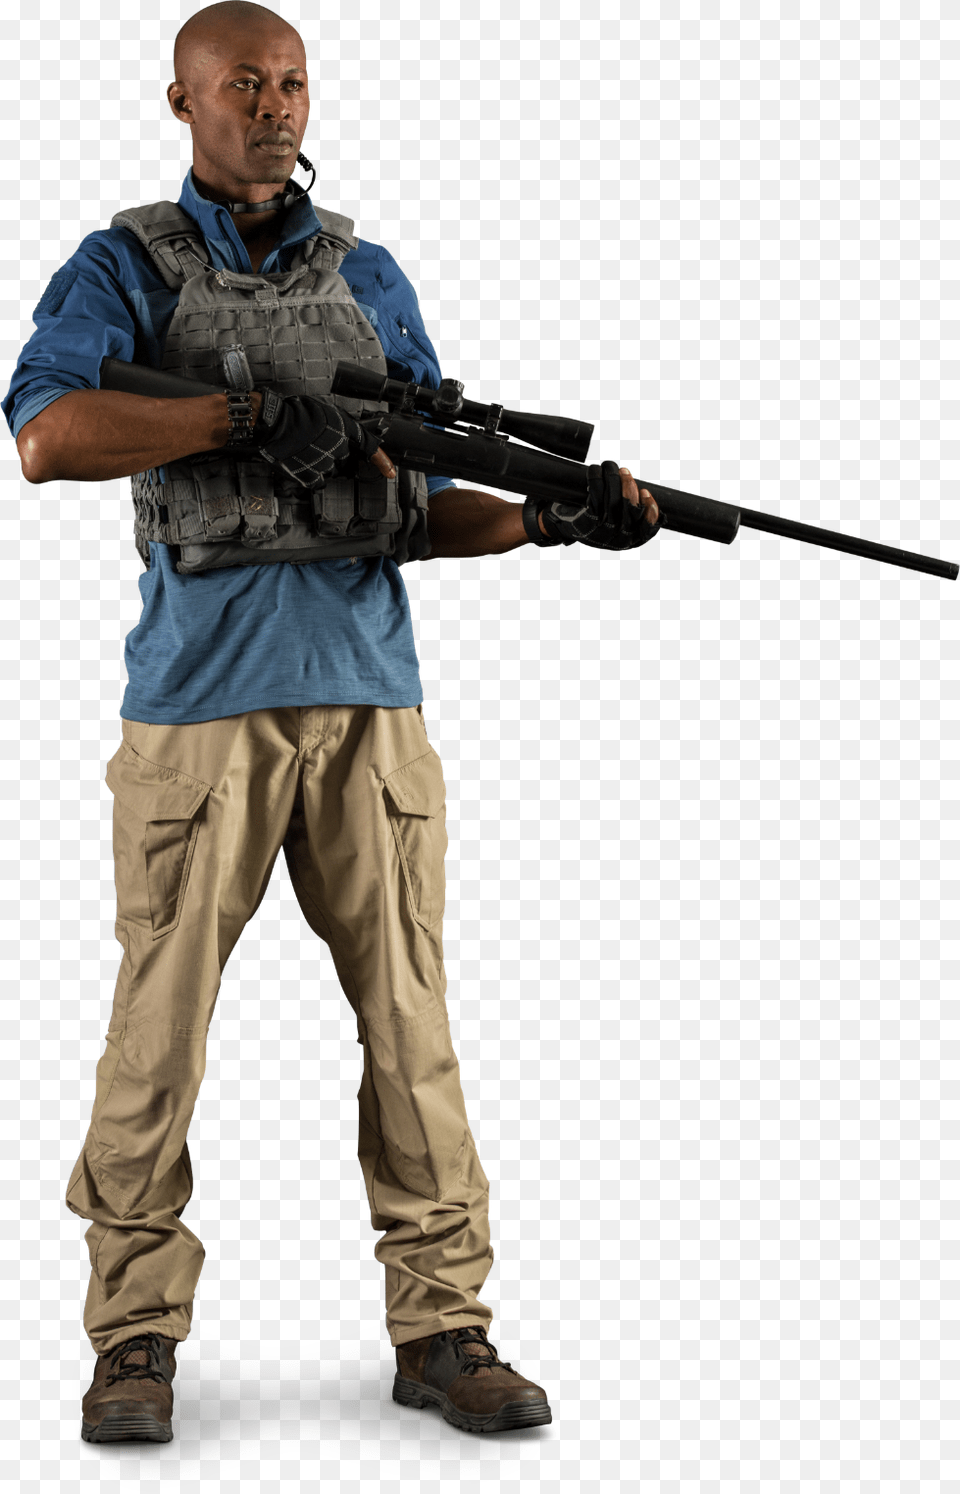 Nomad Profile View Ghost Recon Wildlands Rop, Weapon, Rifle, Firearm, Gun Free Png